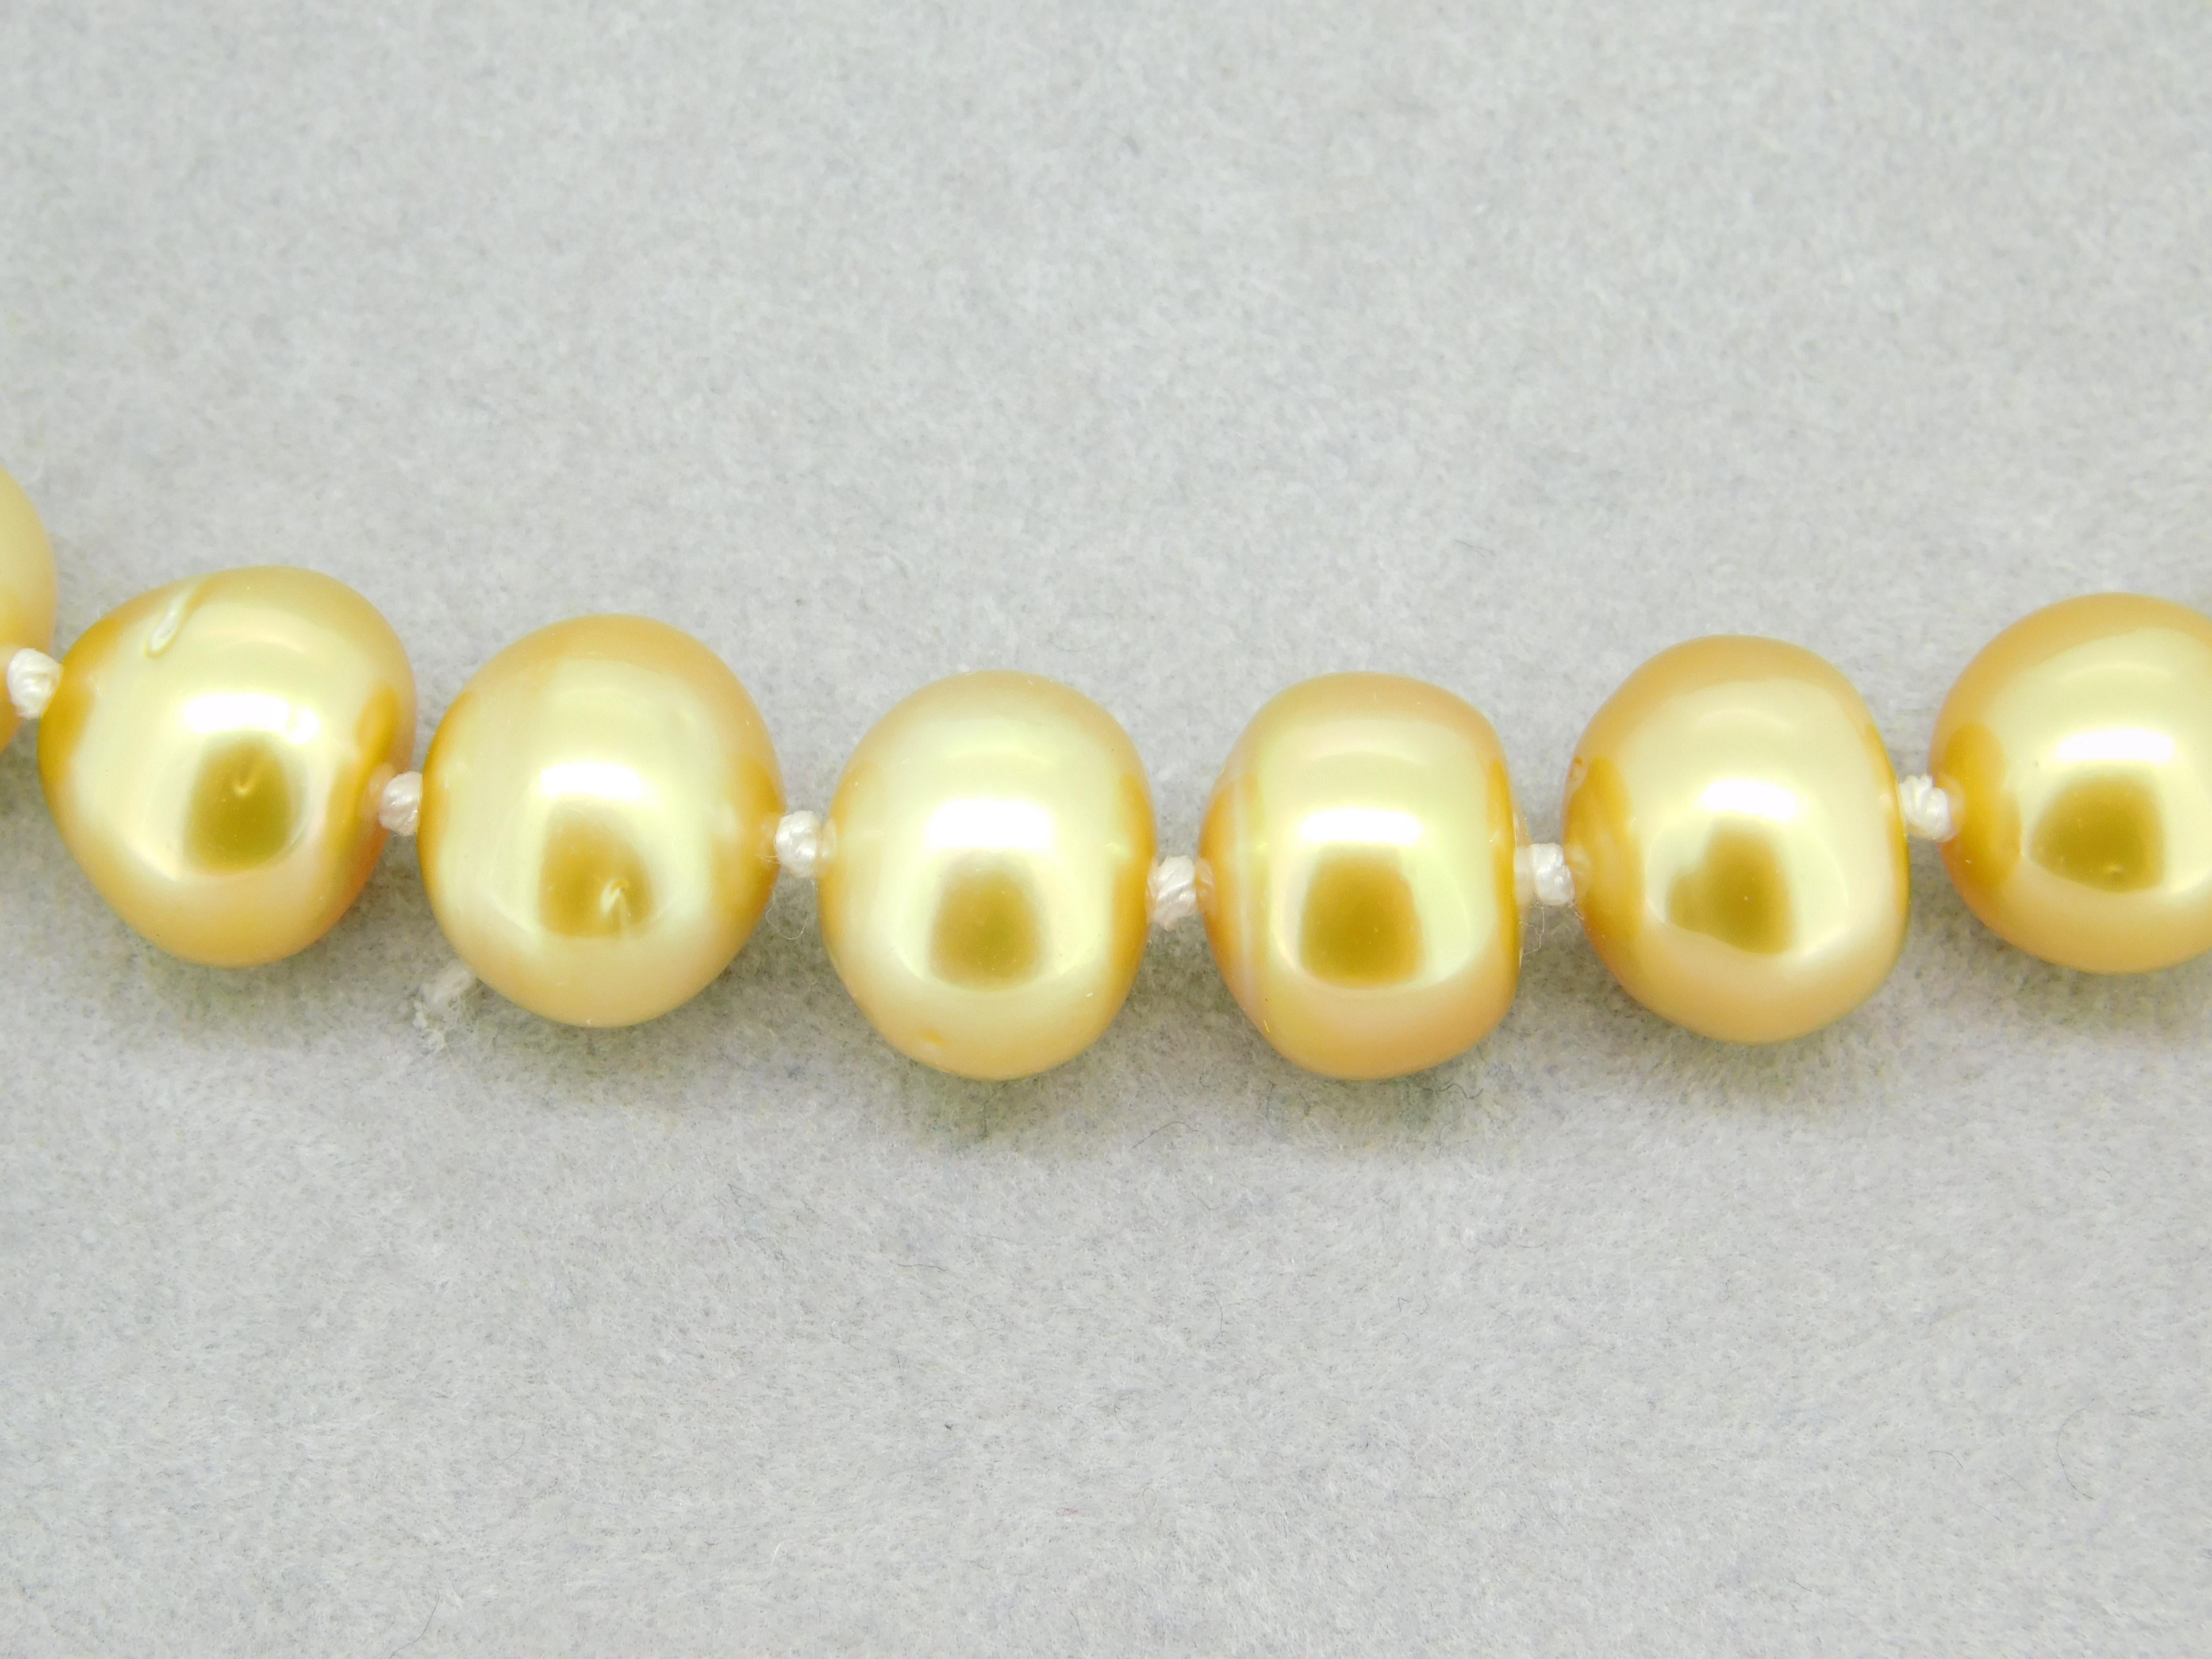 9mm Golden South Sea Strand of Pearls Necklace w/ 14k Yellow Gold Clasp (#J4569)

Strand of Tahitian south sea golden cultured pearls. The pearls are round to semi-round shape cultured in French Polynesia. Natural light golden color, not treated or